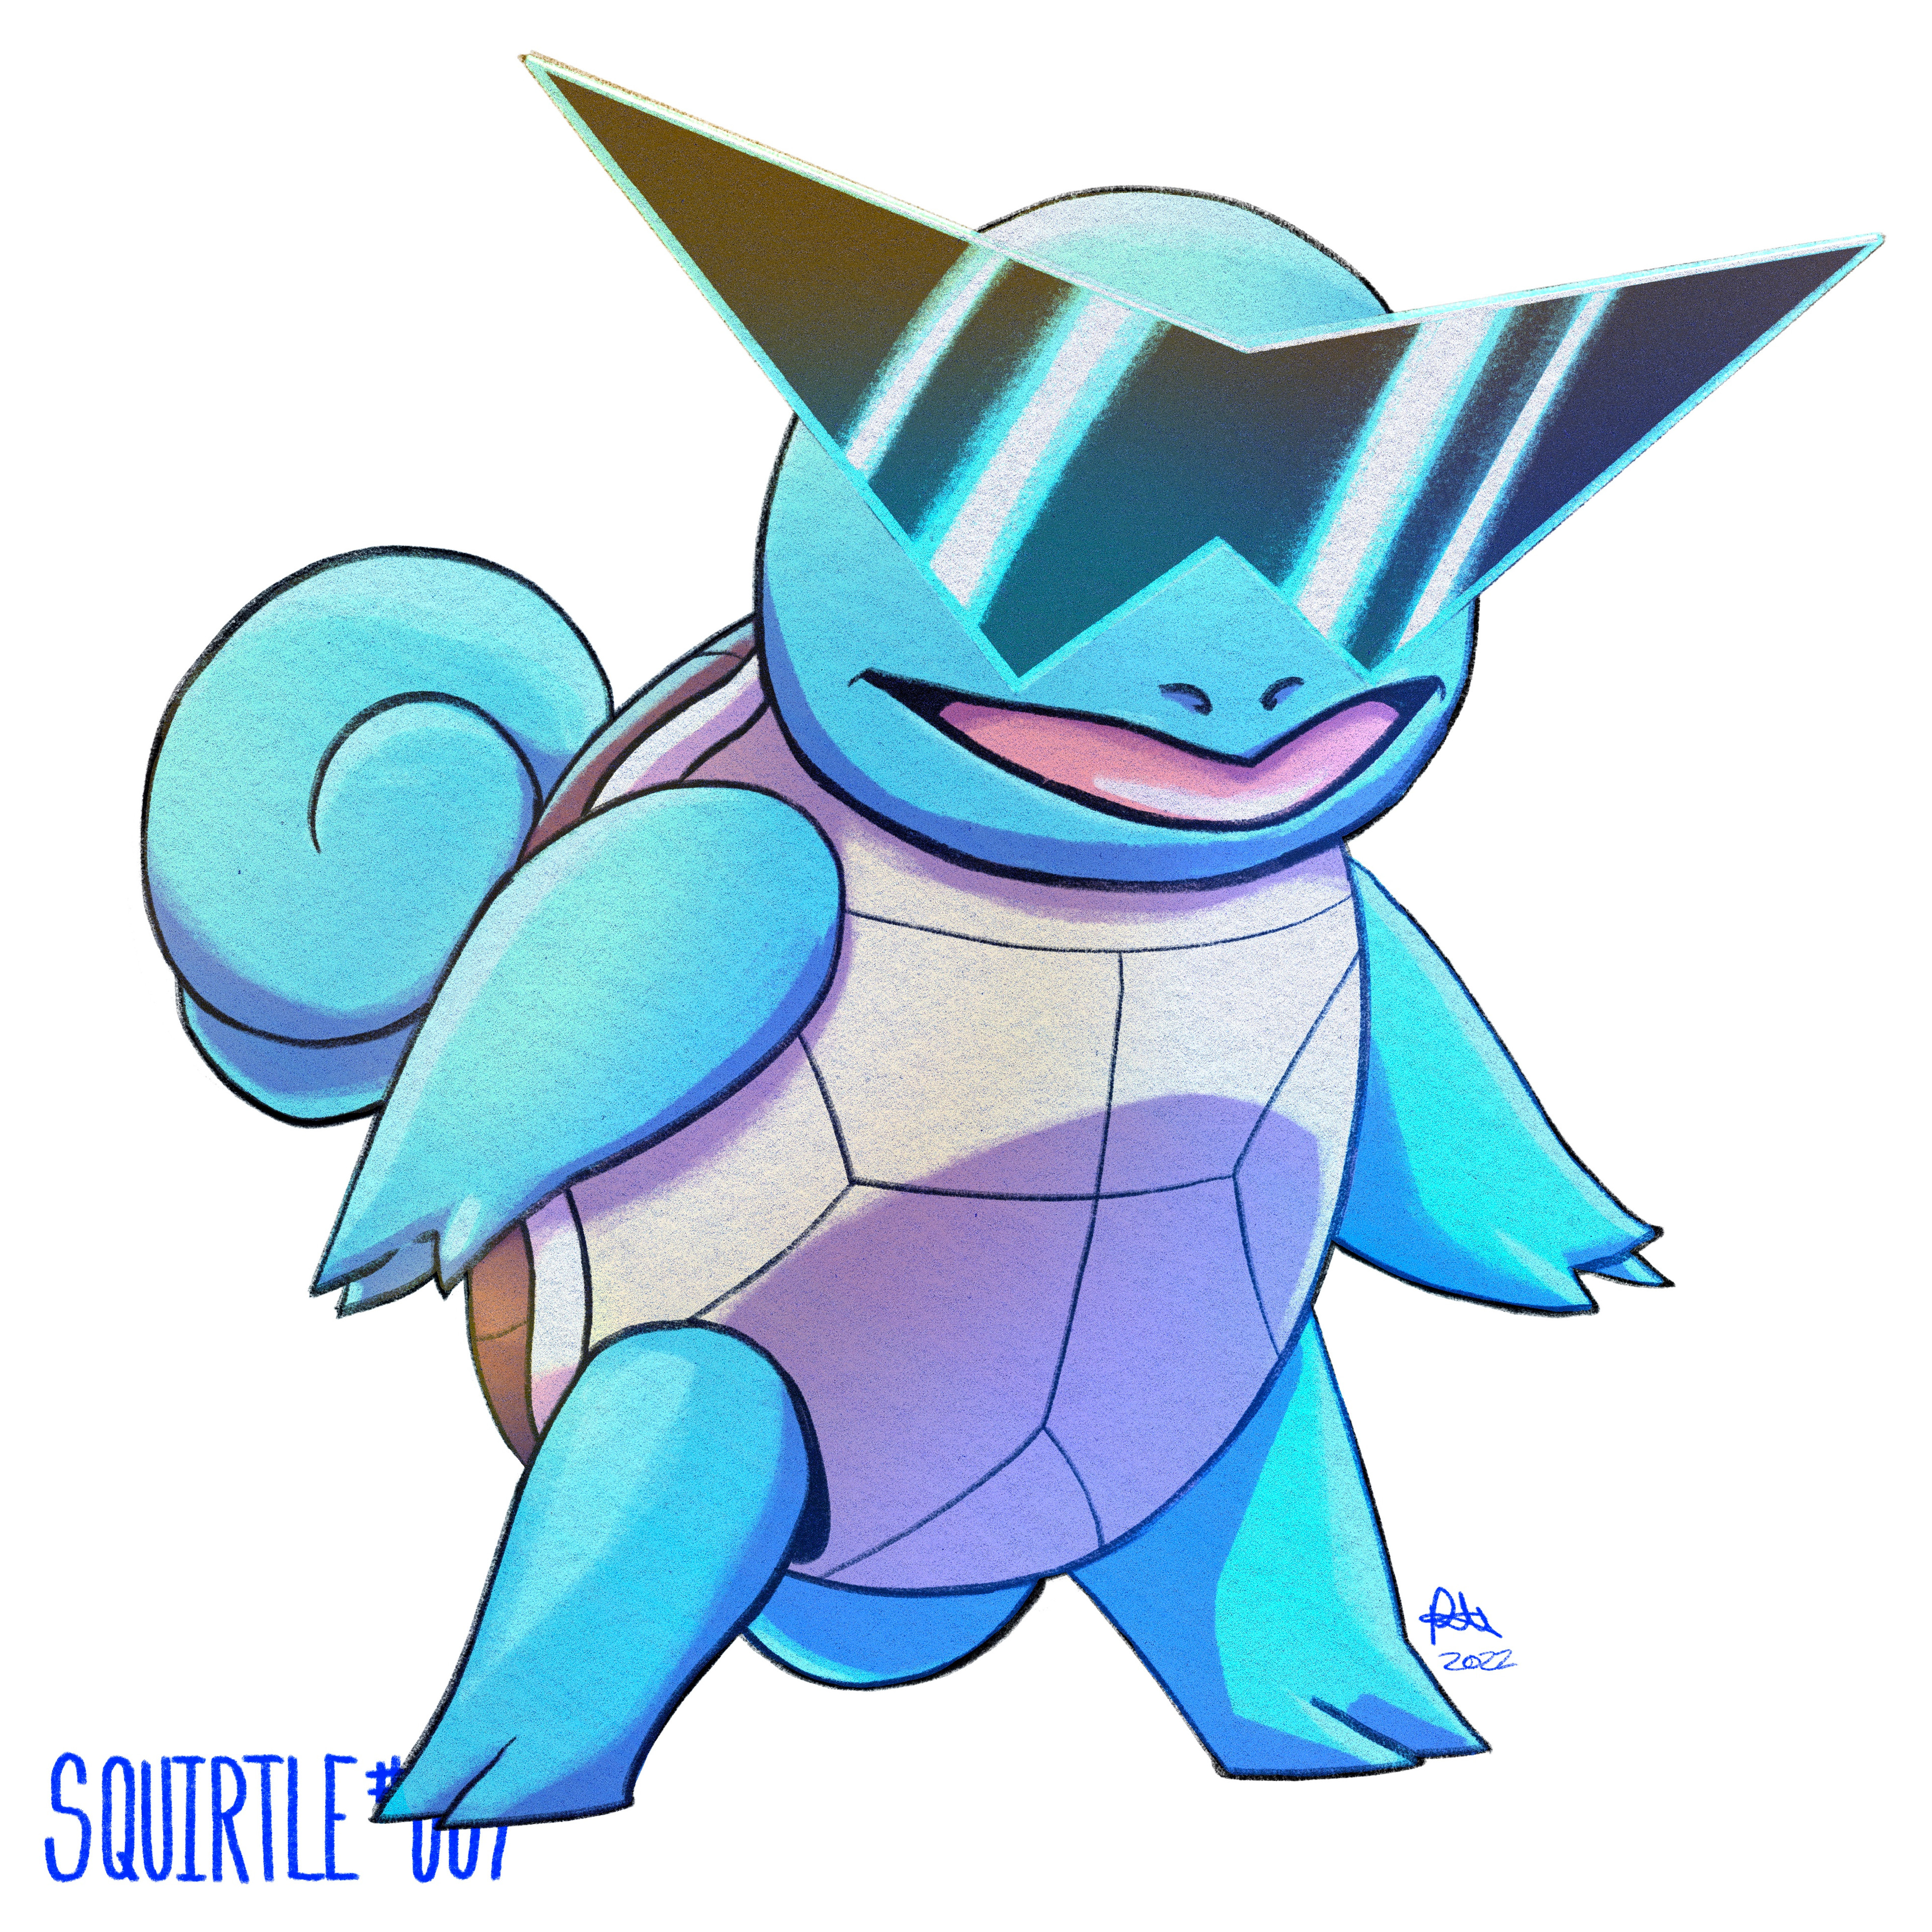 Squirtle Squard Squirtle - Blue